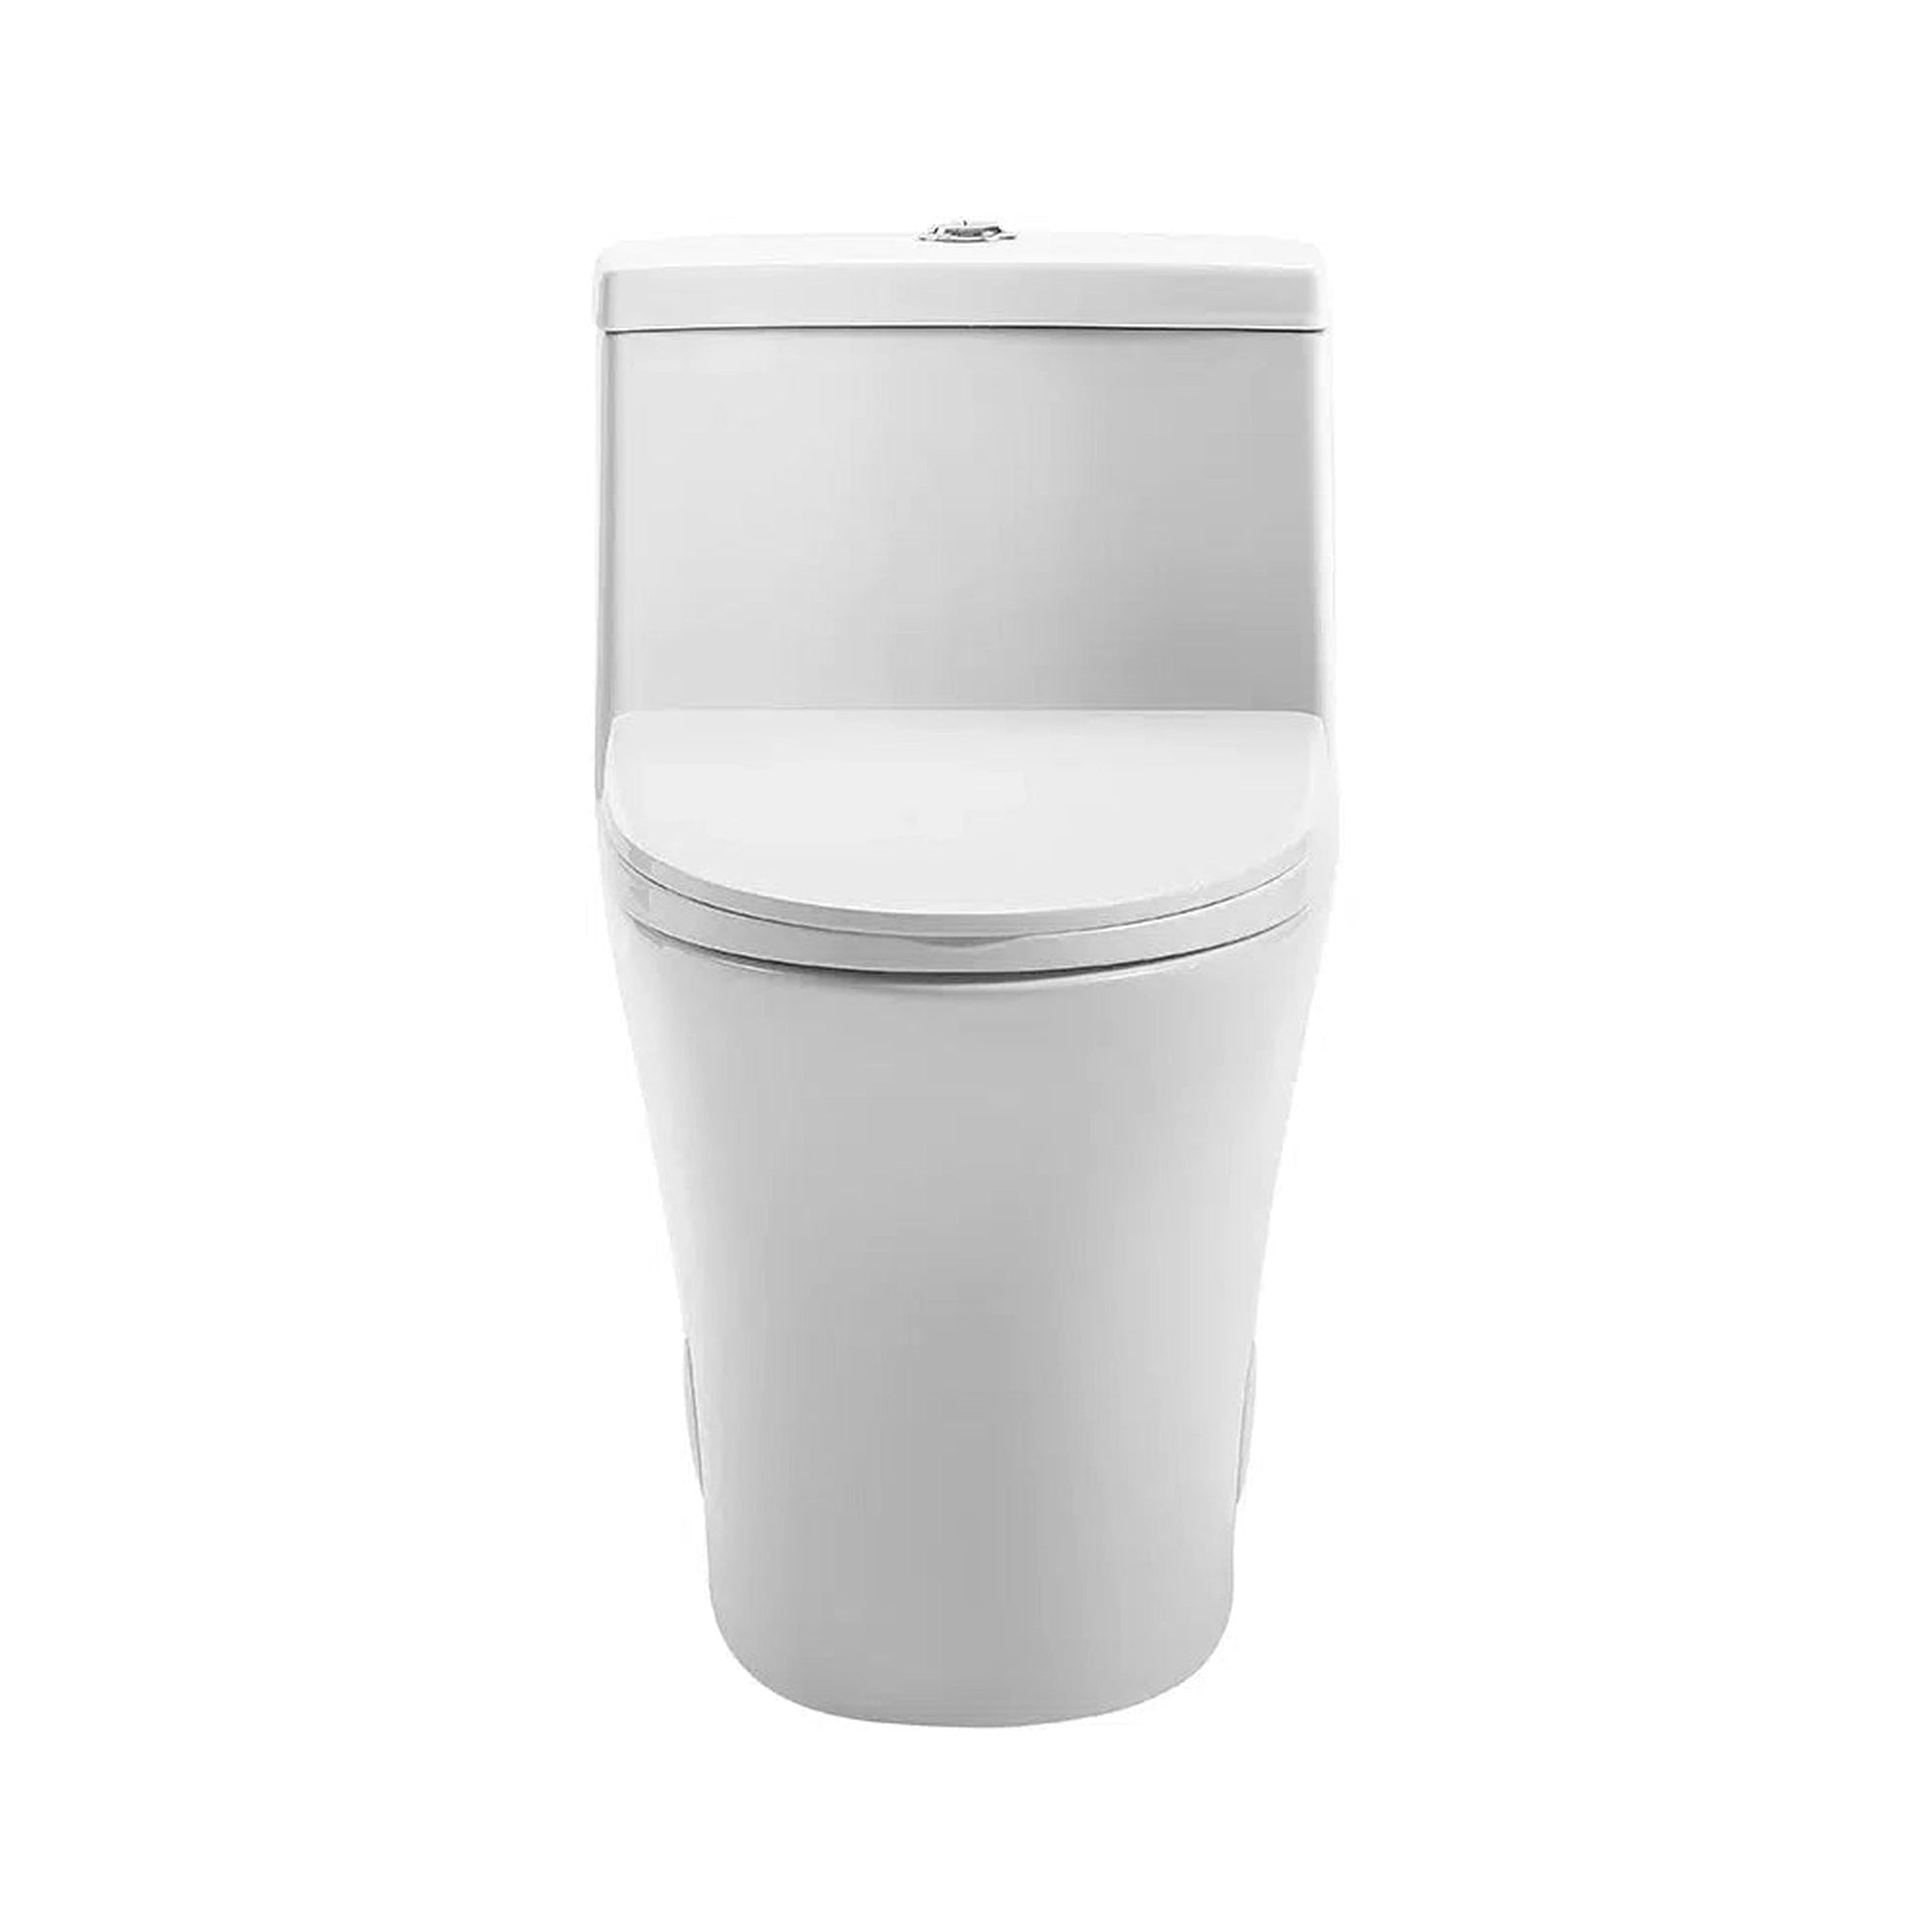 Swiss Madison Bastille 16" x 27" One-Piece White Elongated Floor-Mounted Toilet With 1.1/1.6 GPF